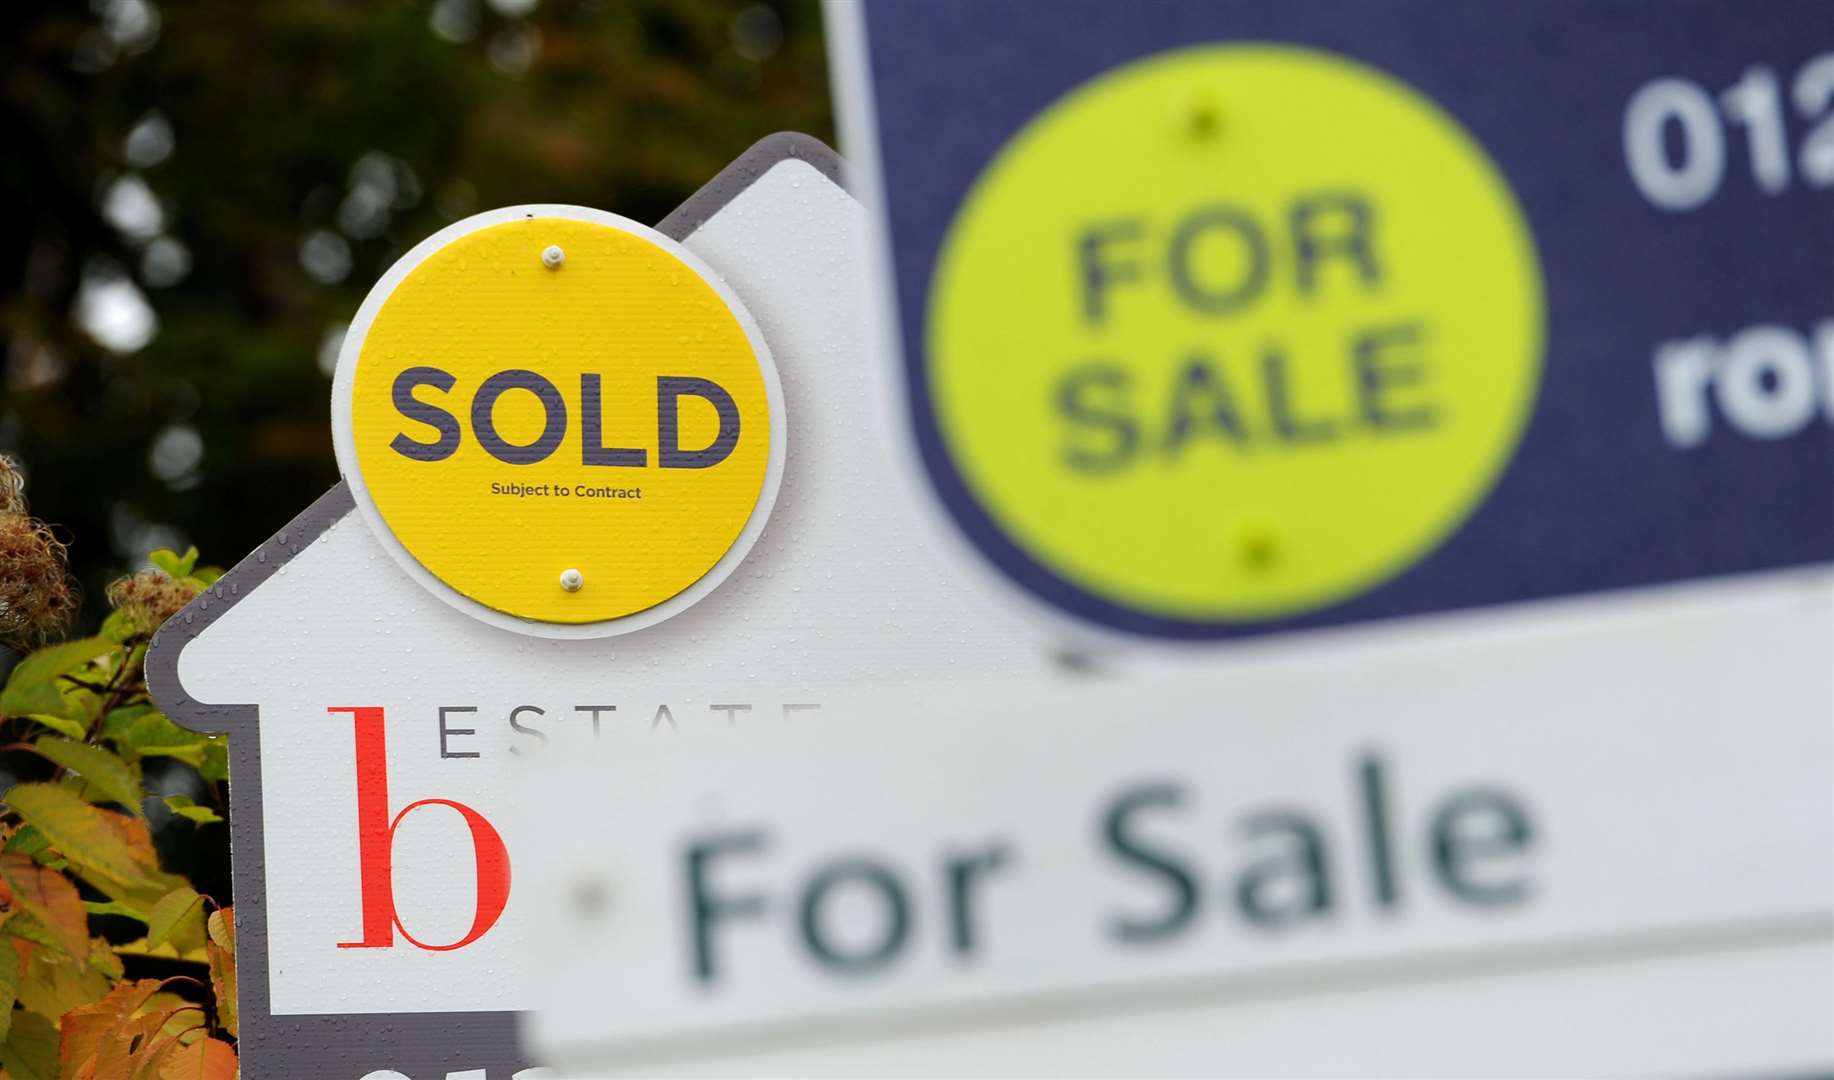 Could house prices be hit by the interest rates rises? Many experts think so...